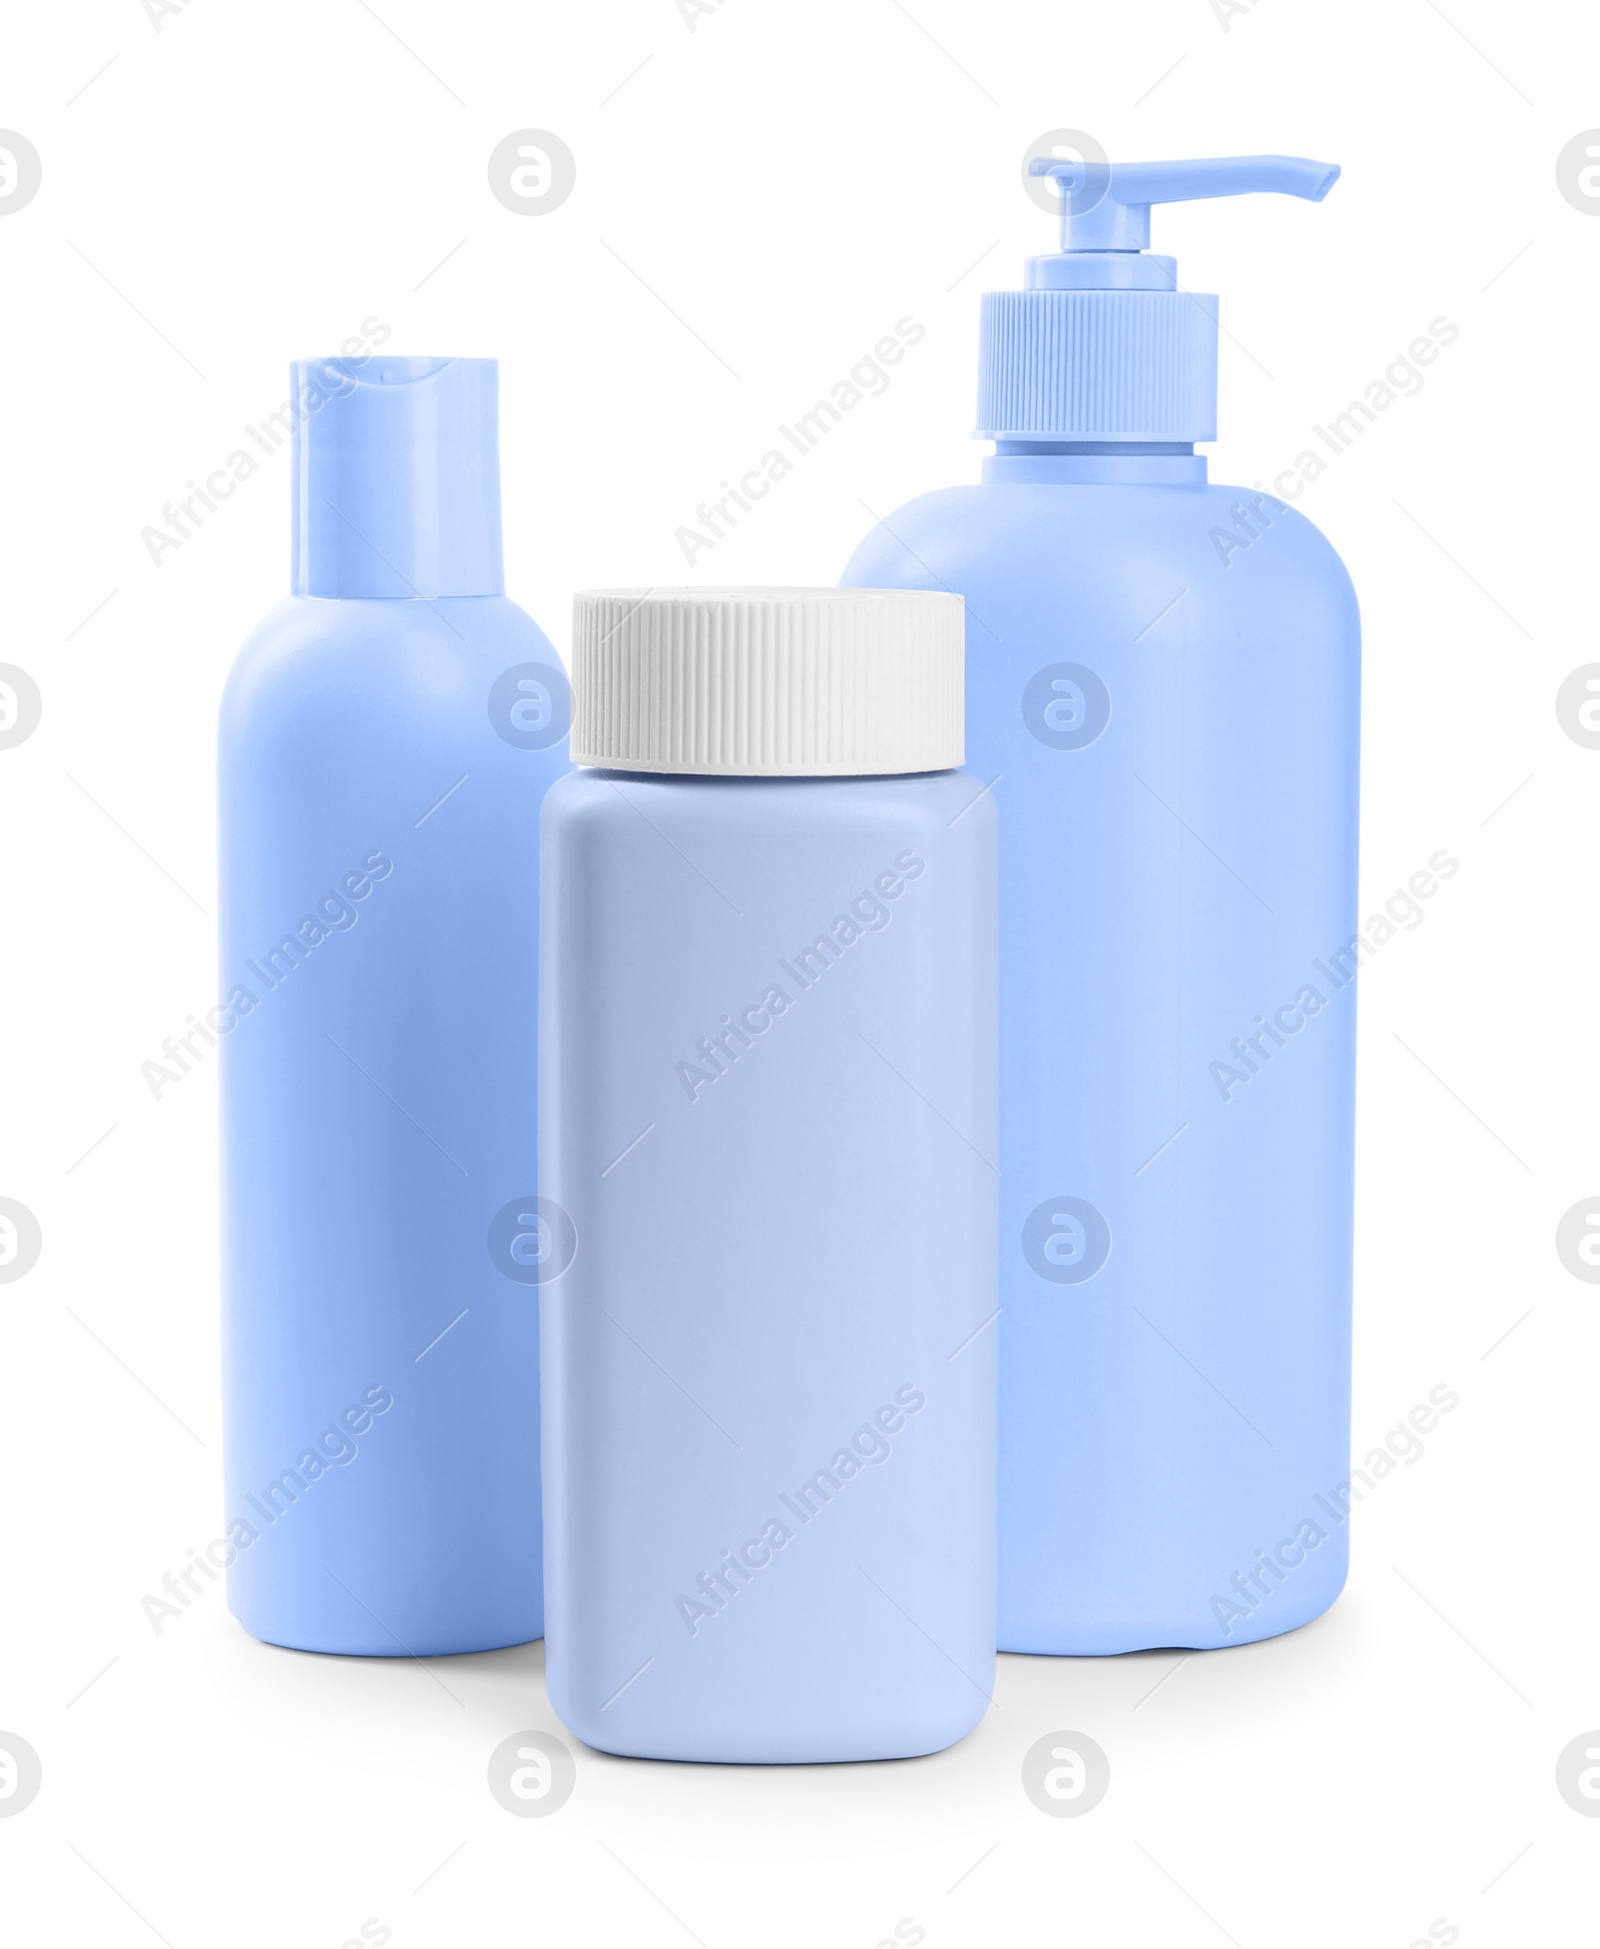 Photo of Different skin care products for baby in bottles isolated on white